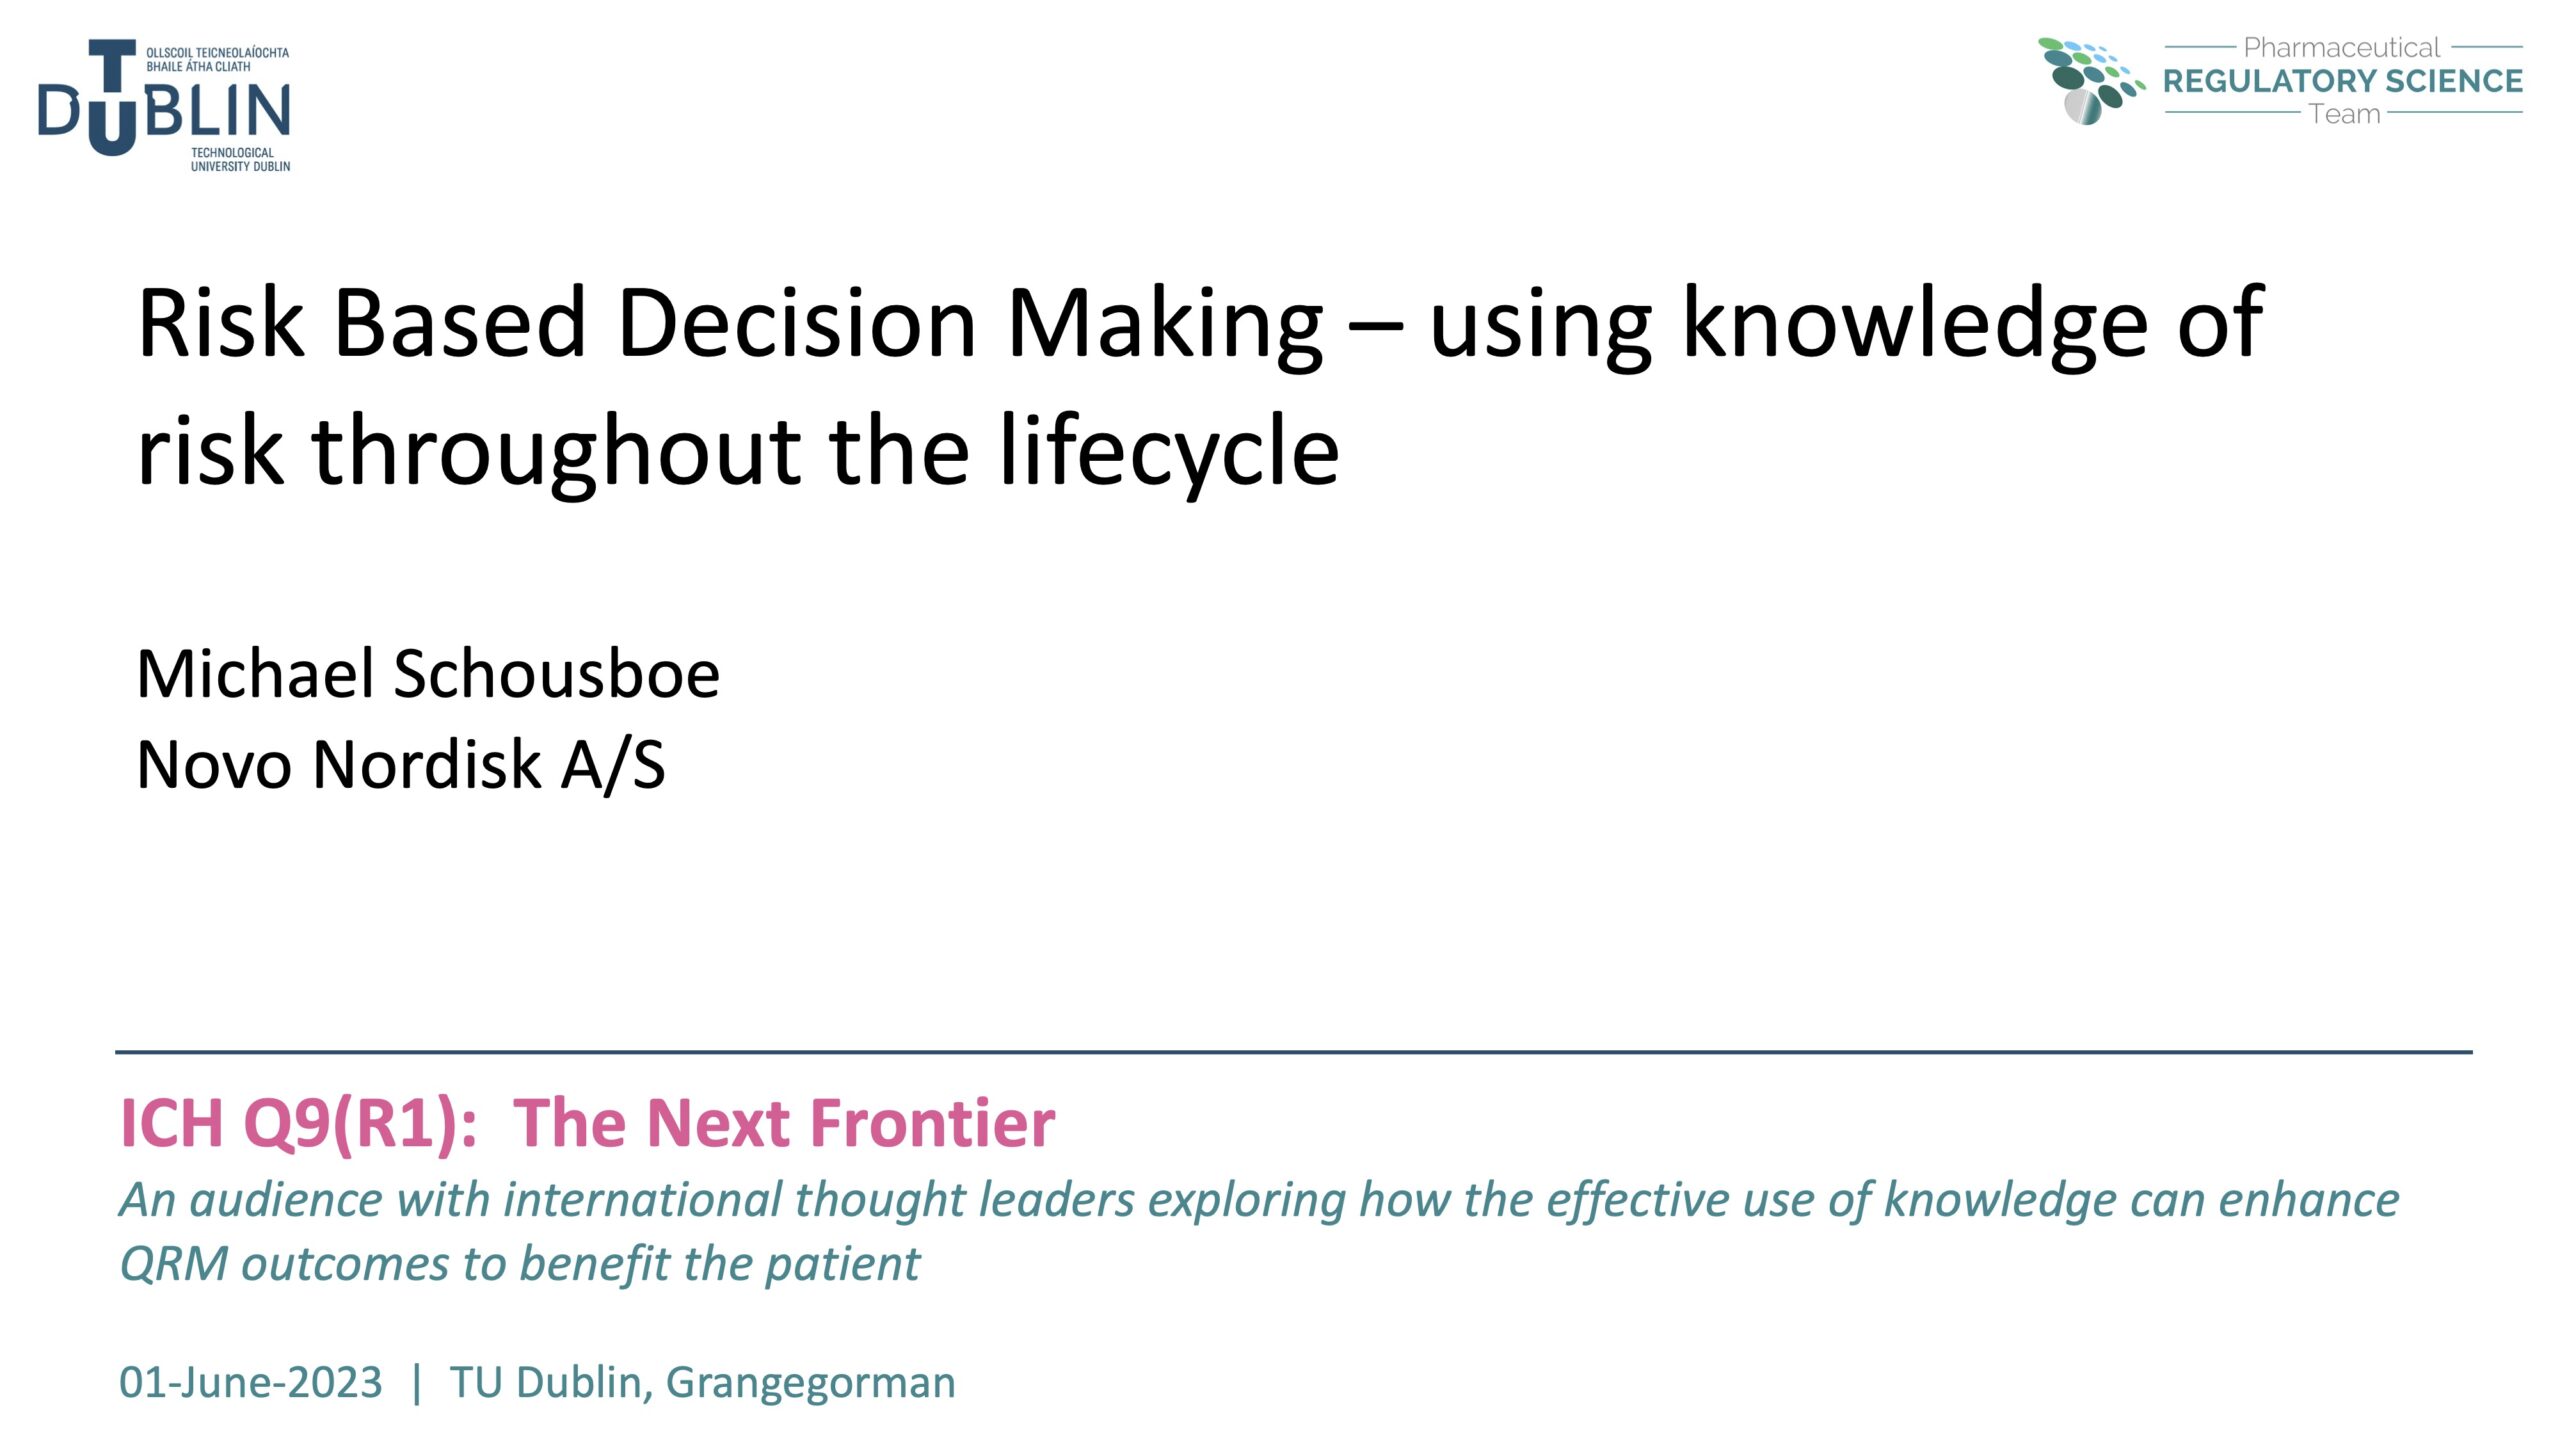 Risk Based Decision Making – using knowledge of risk throughout the lifecycle